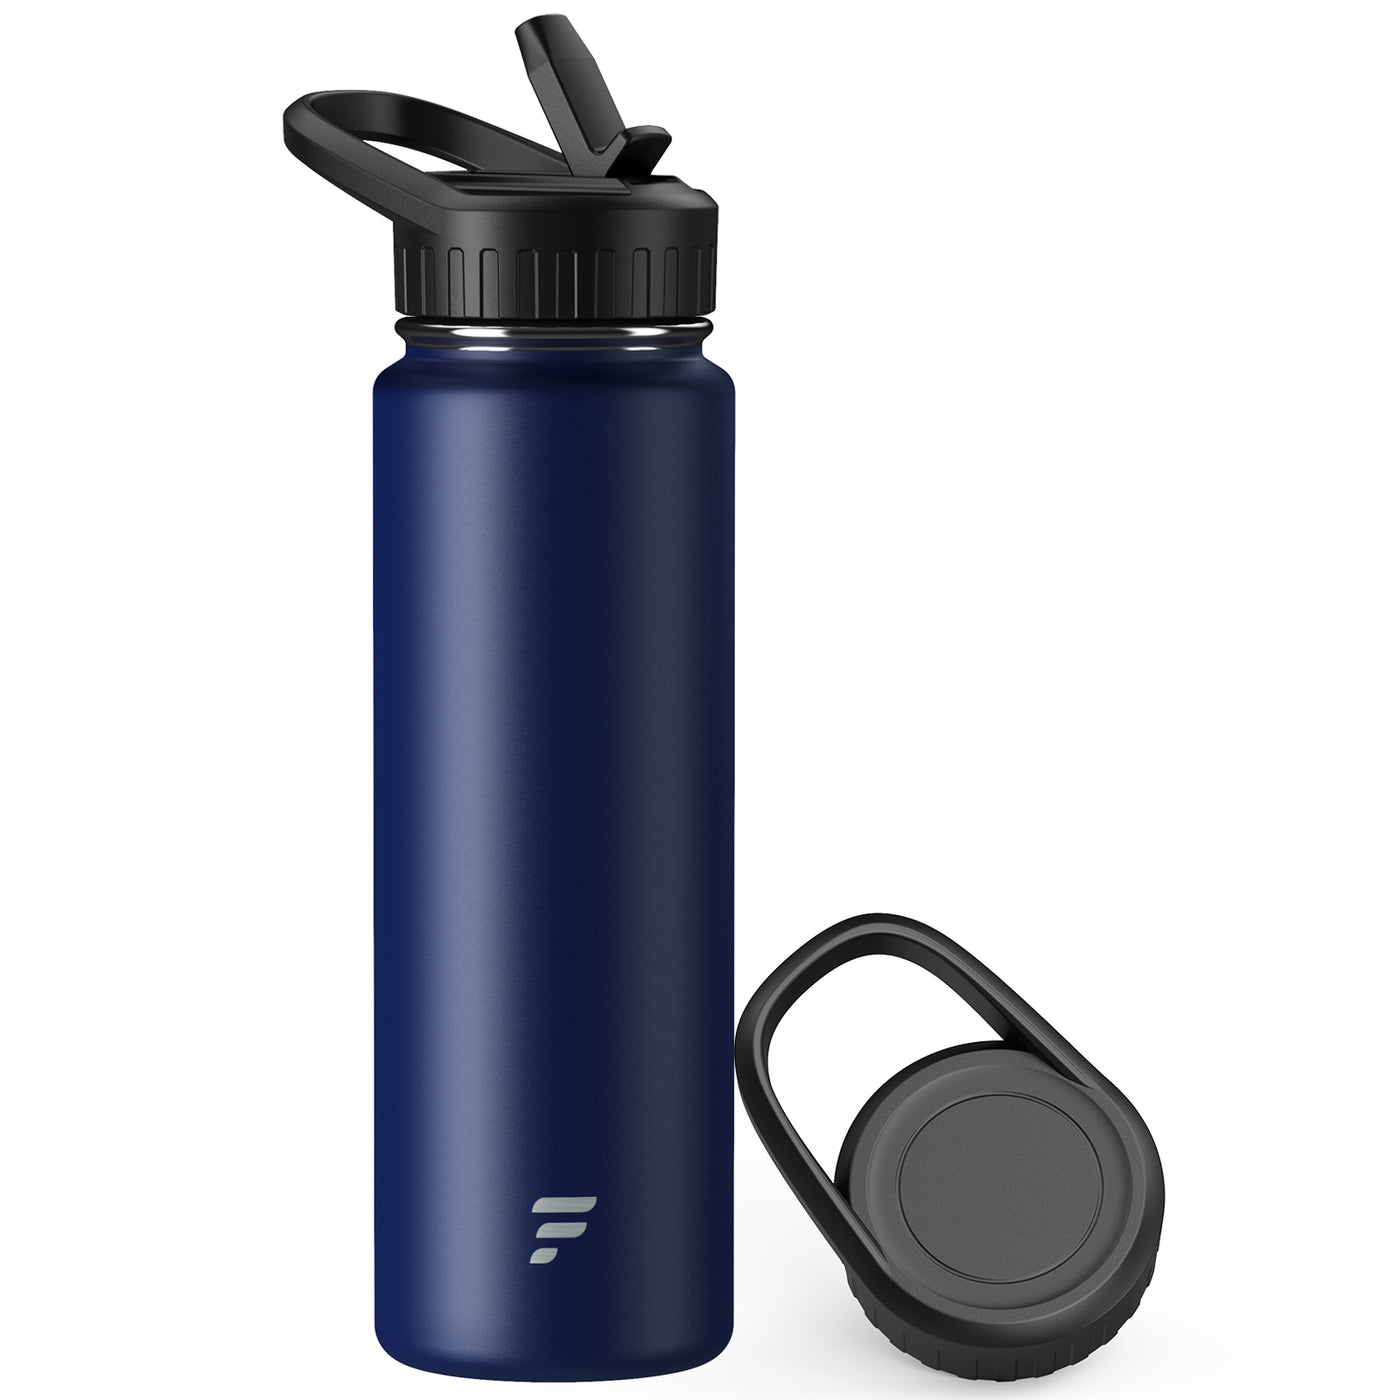 Letsfit S01 16-fl oz Stainless Steel Water Bottle at